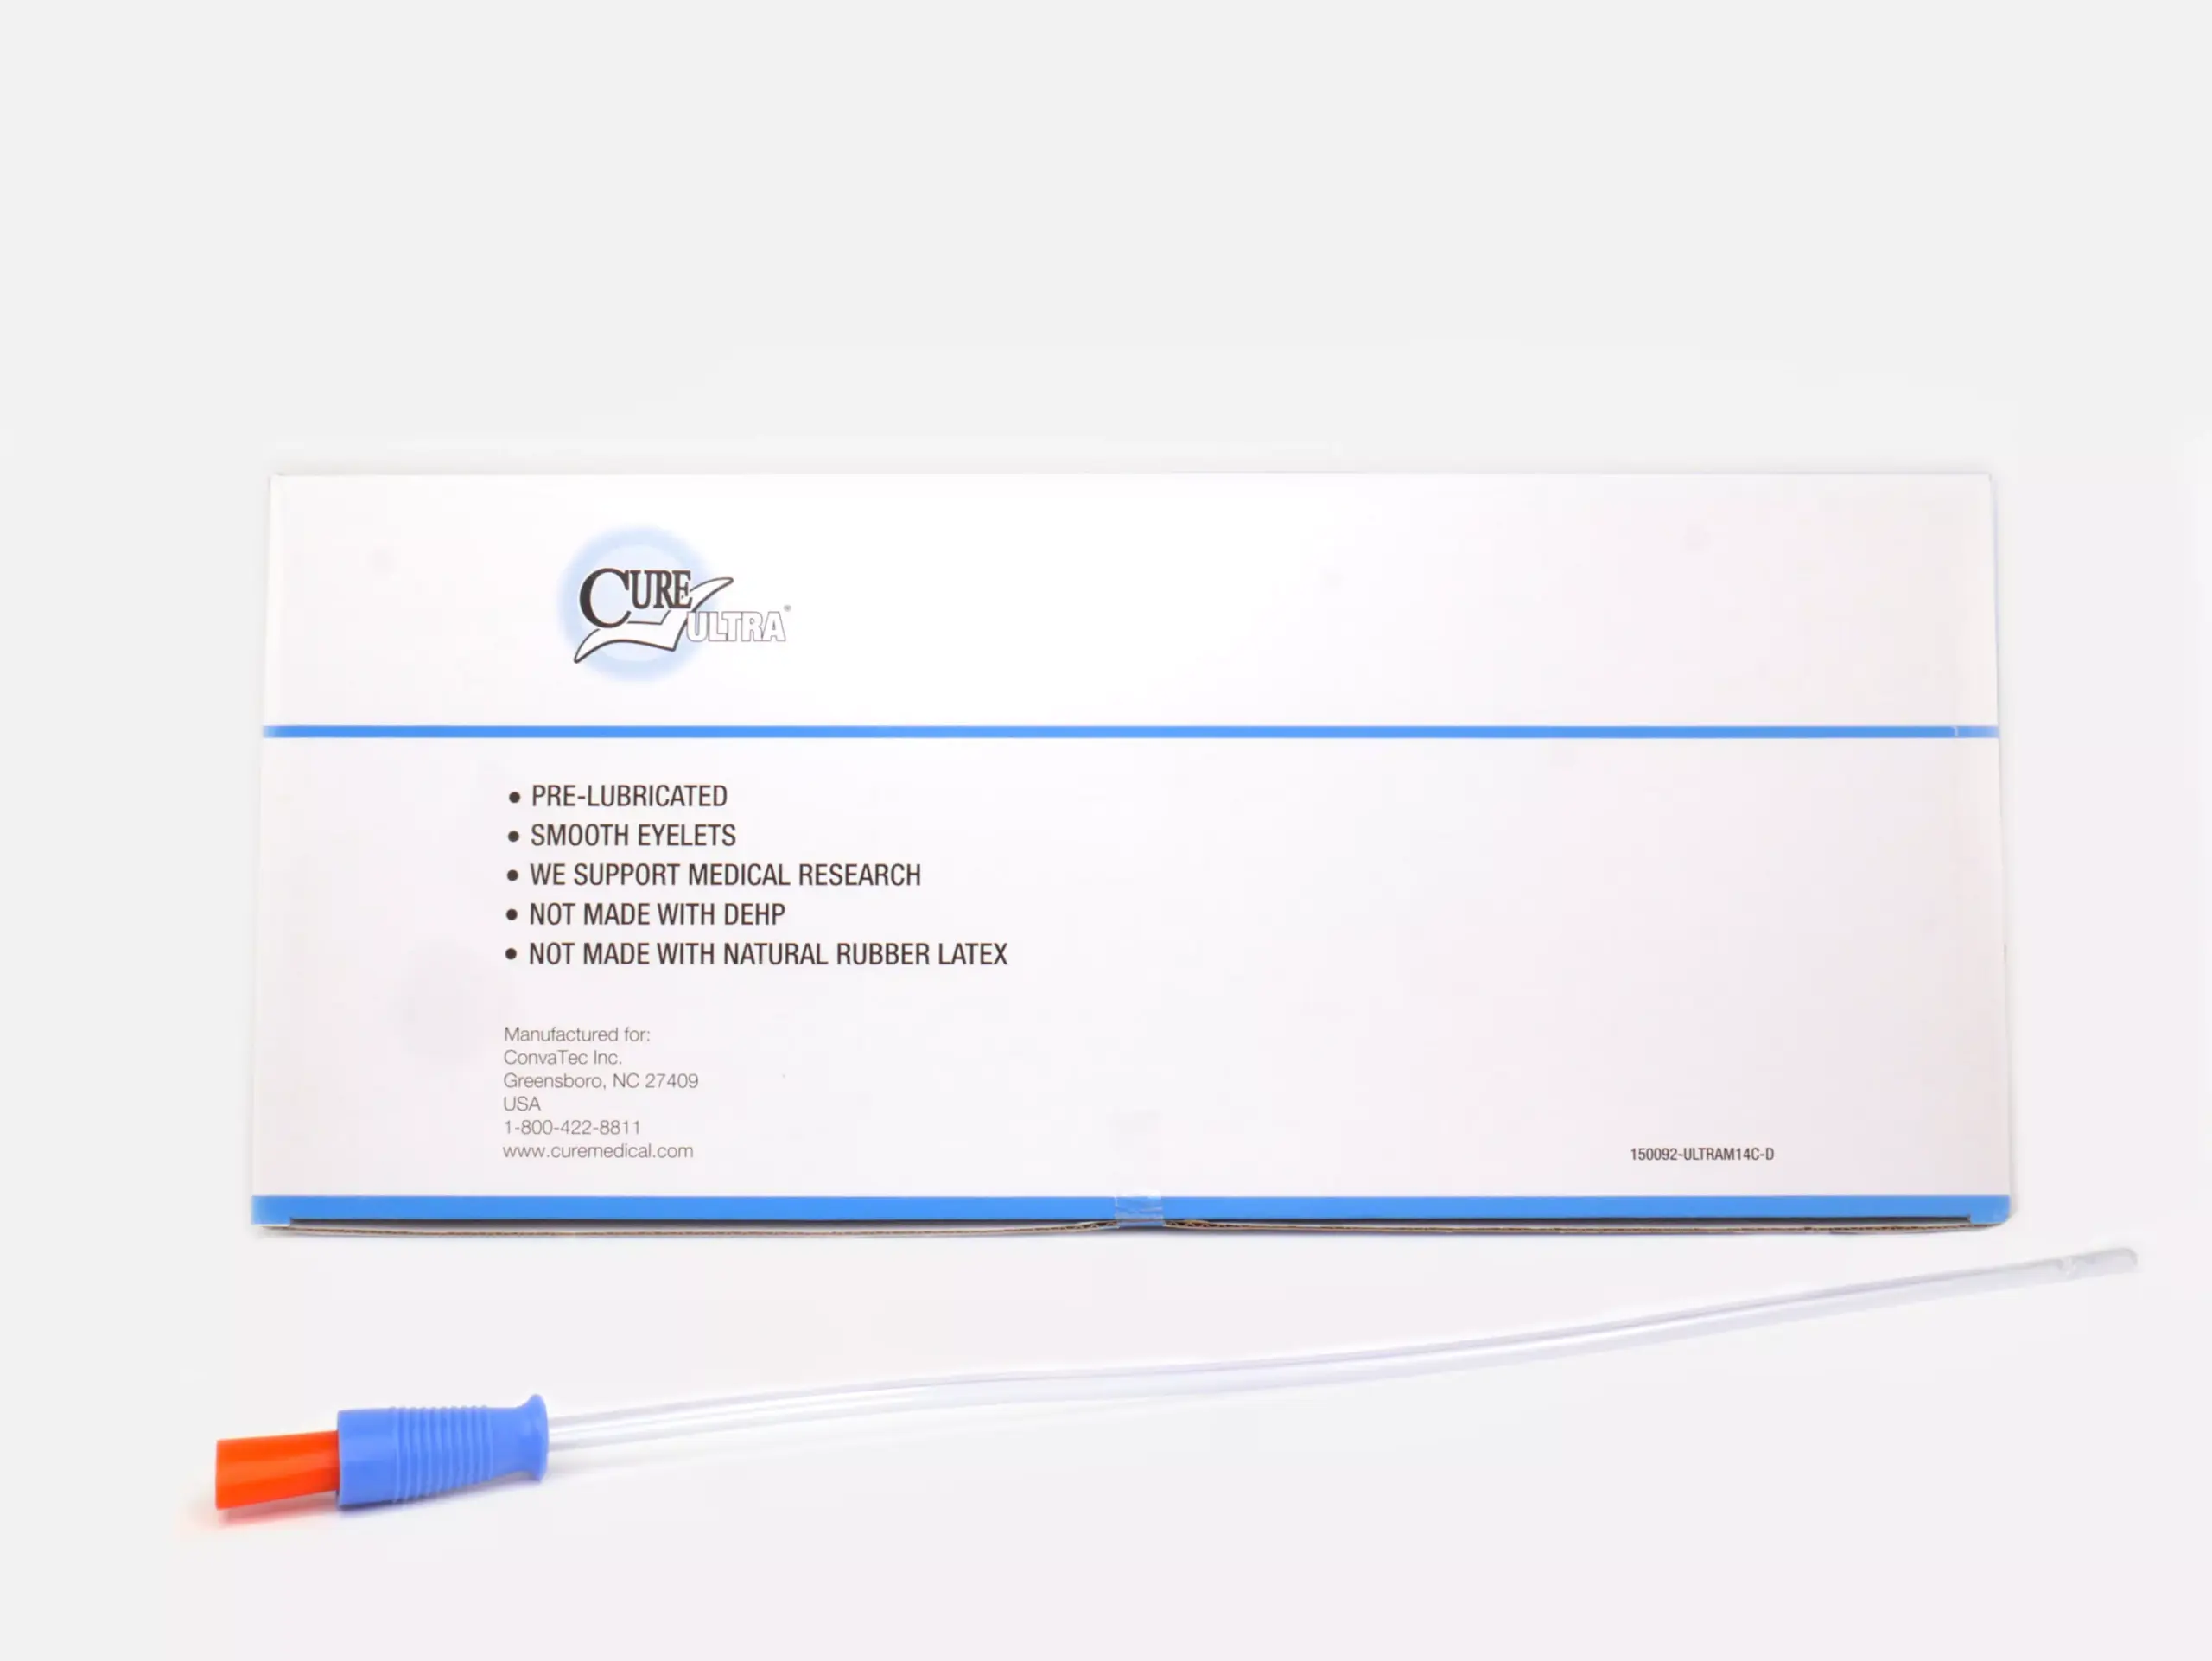 Image featuring a RA Fischer Co. Cure brand catheter box set against a white background. In front of the box is a catheter with blue and orange grip. The box is labeled 'Cure Ultra,' 'Pre-lubricated,' 'Smooth Eyelets,' 'We support medical research,' 'Not made with DEHP,' 'Not made with natural rubber latex.'